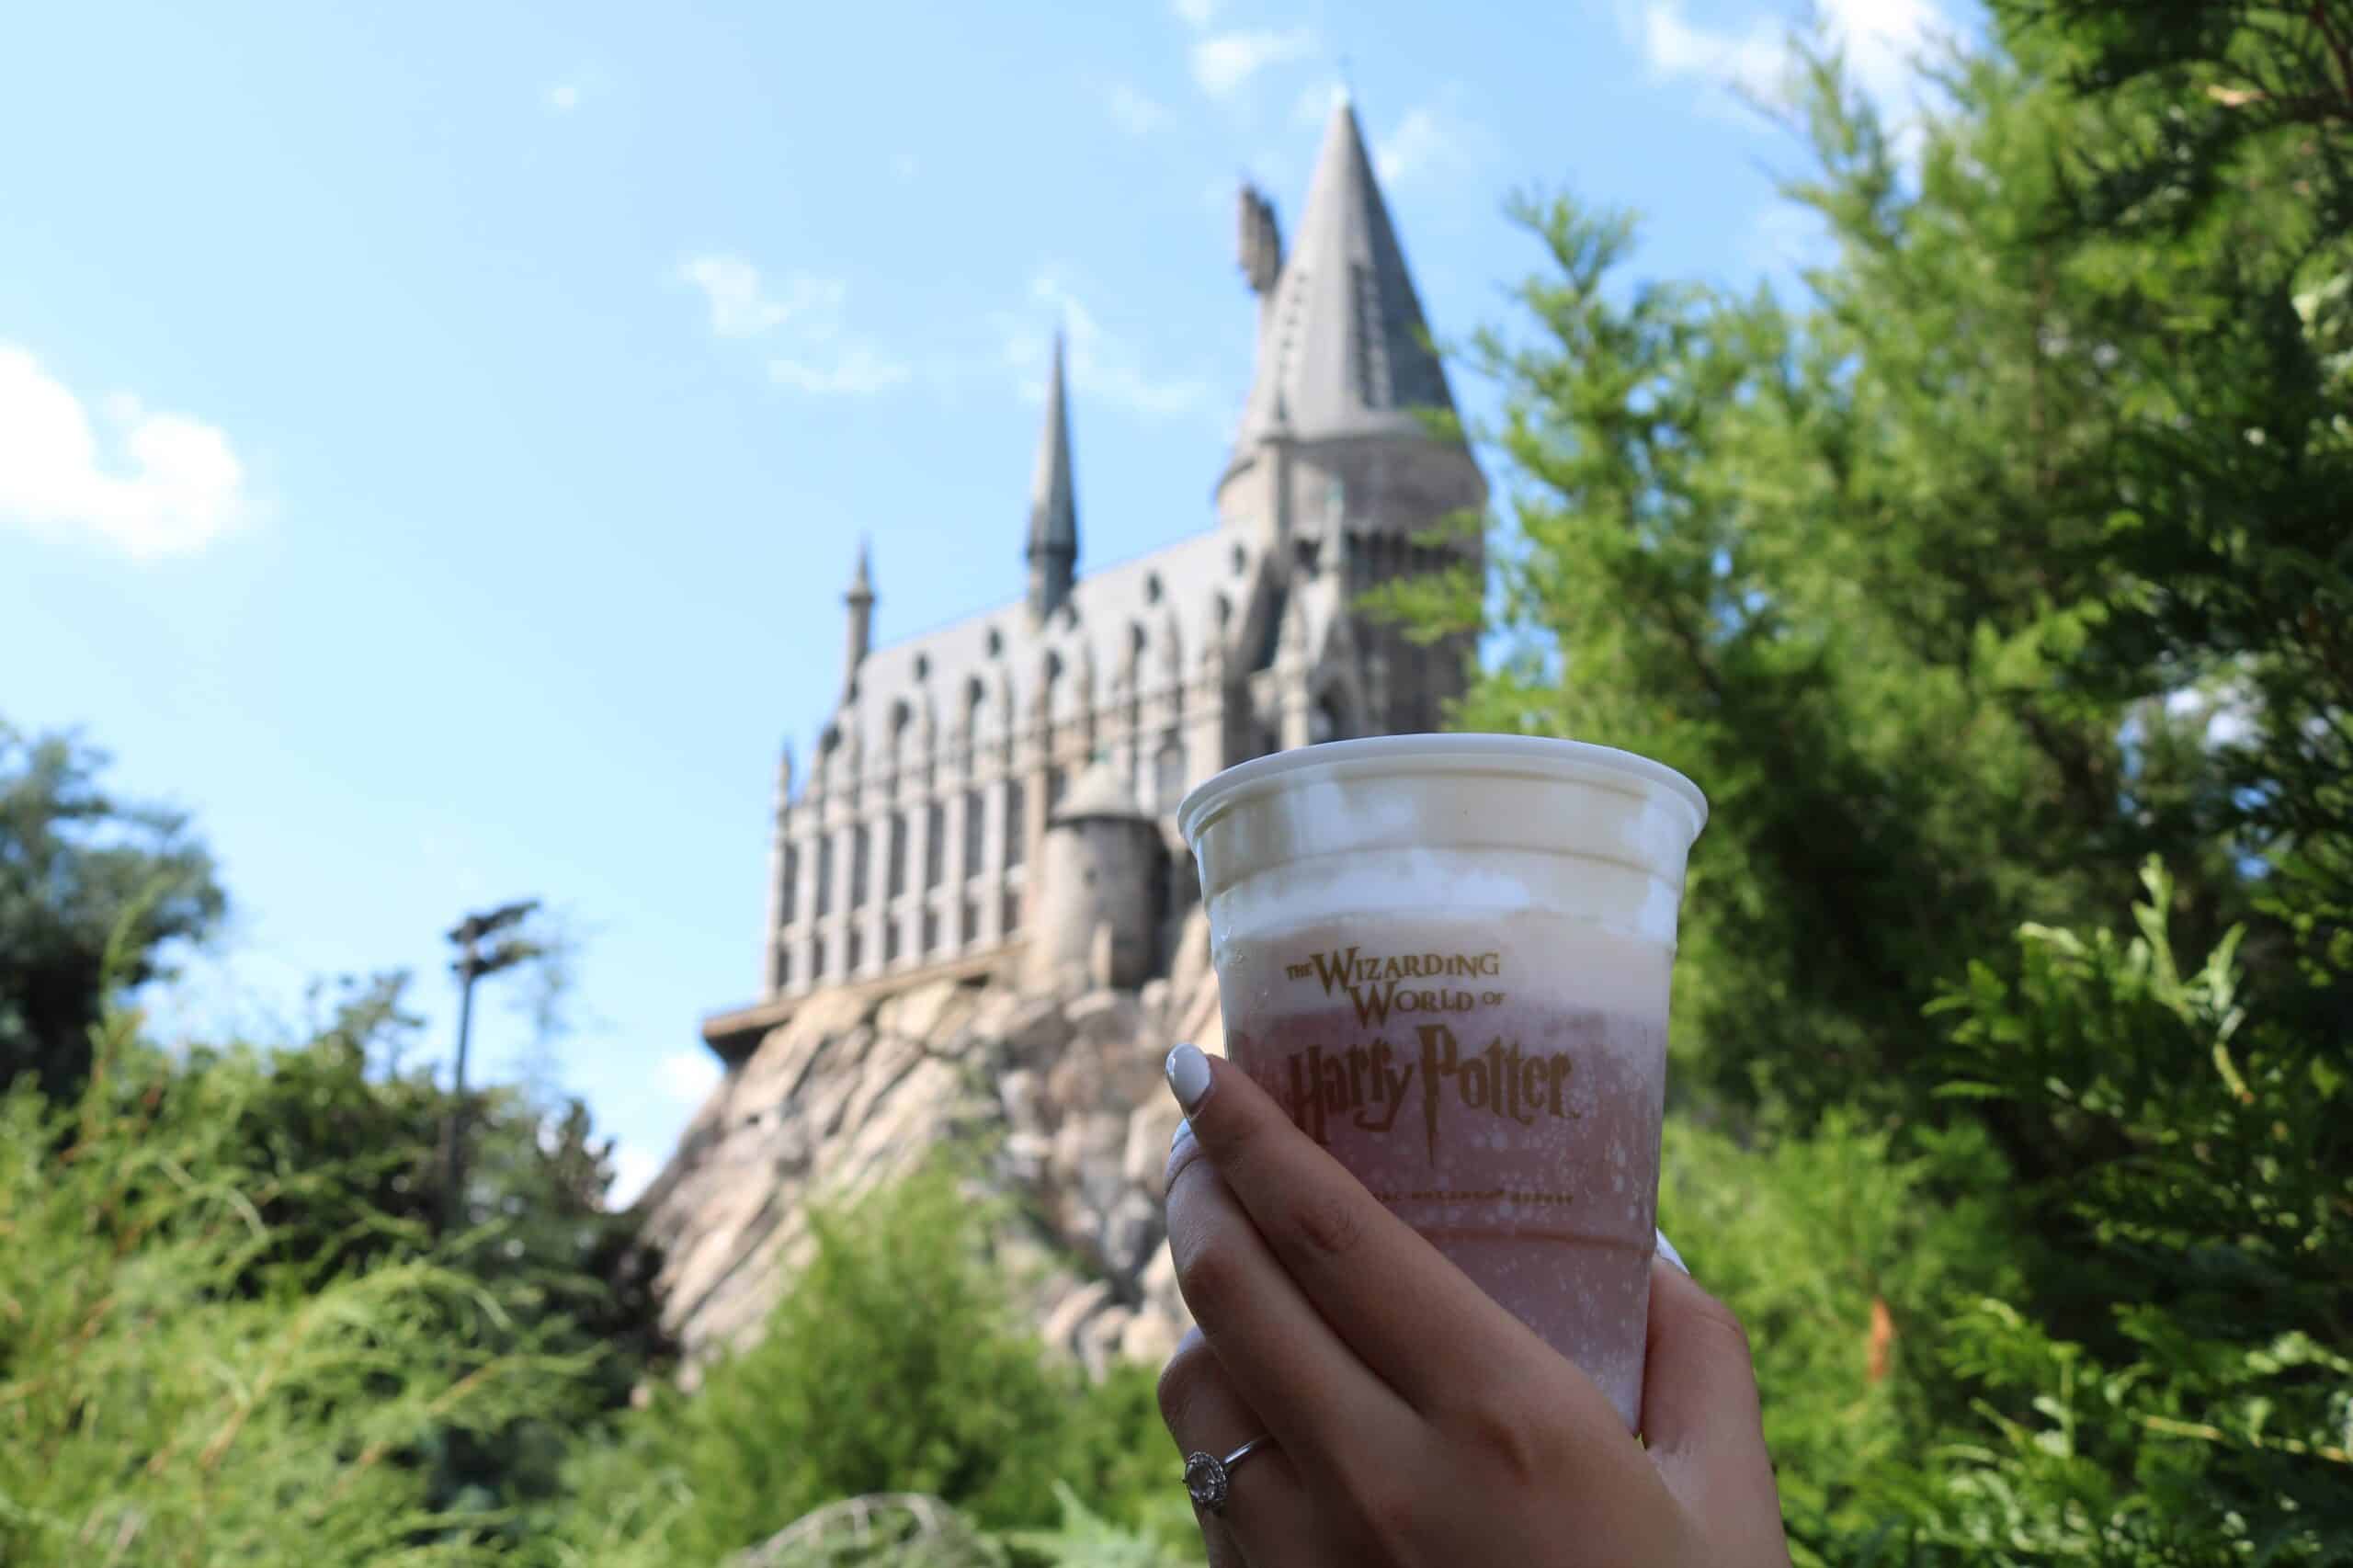 How to save money at theme parks - Michael Belmont - Harry Potter Butter Beer at Universal Studios Orlando